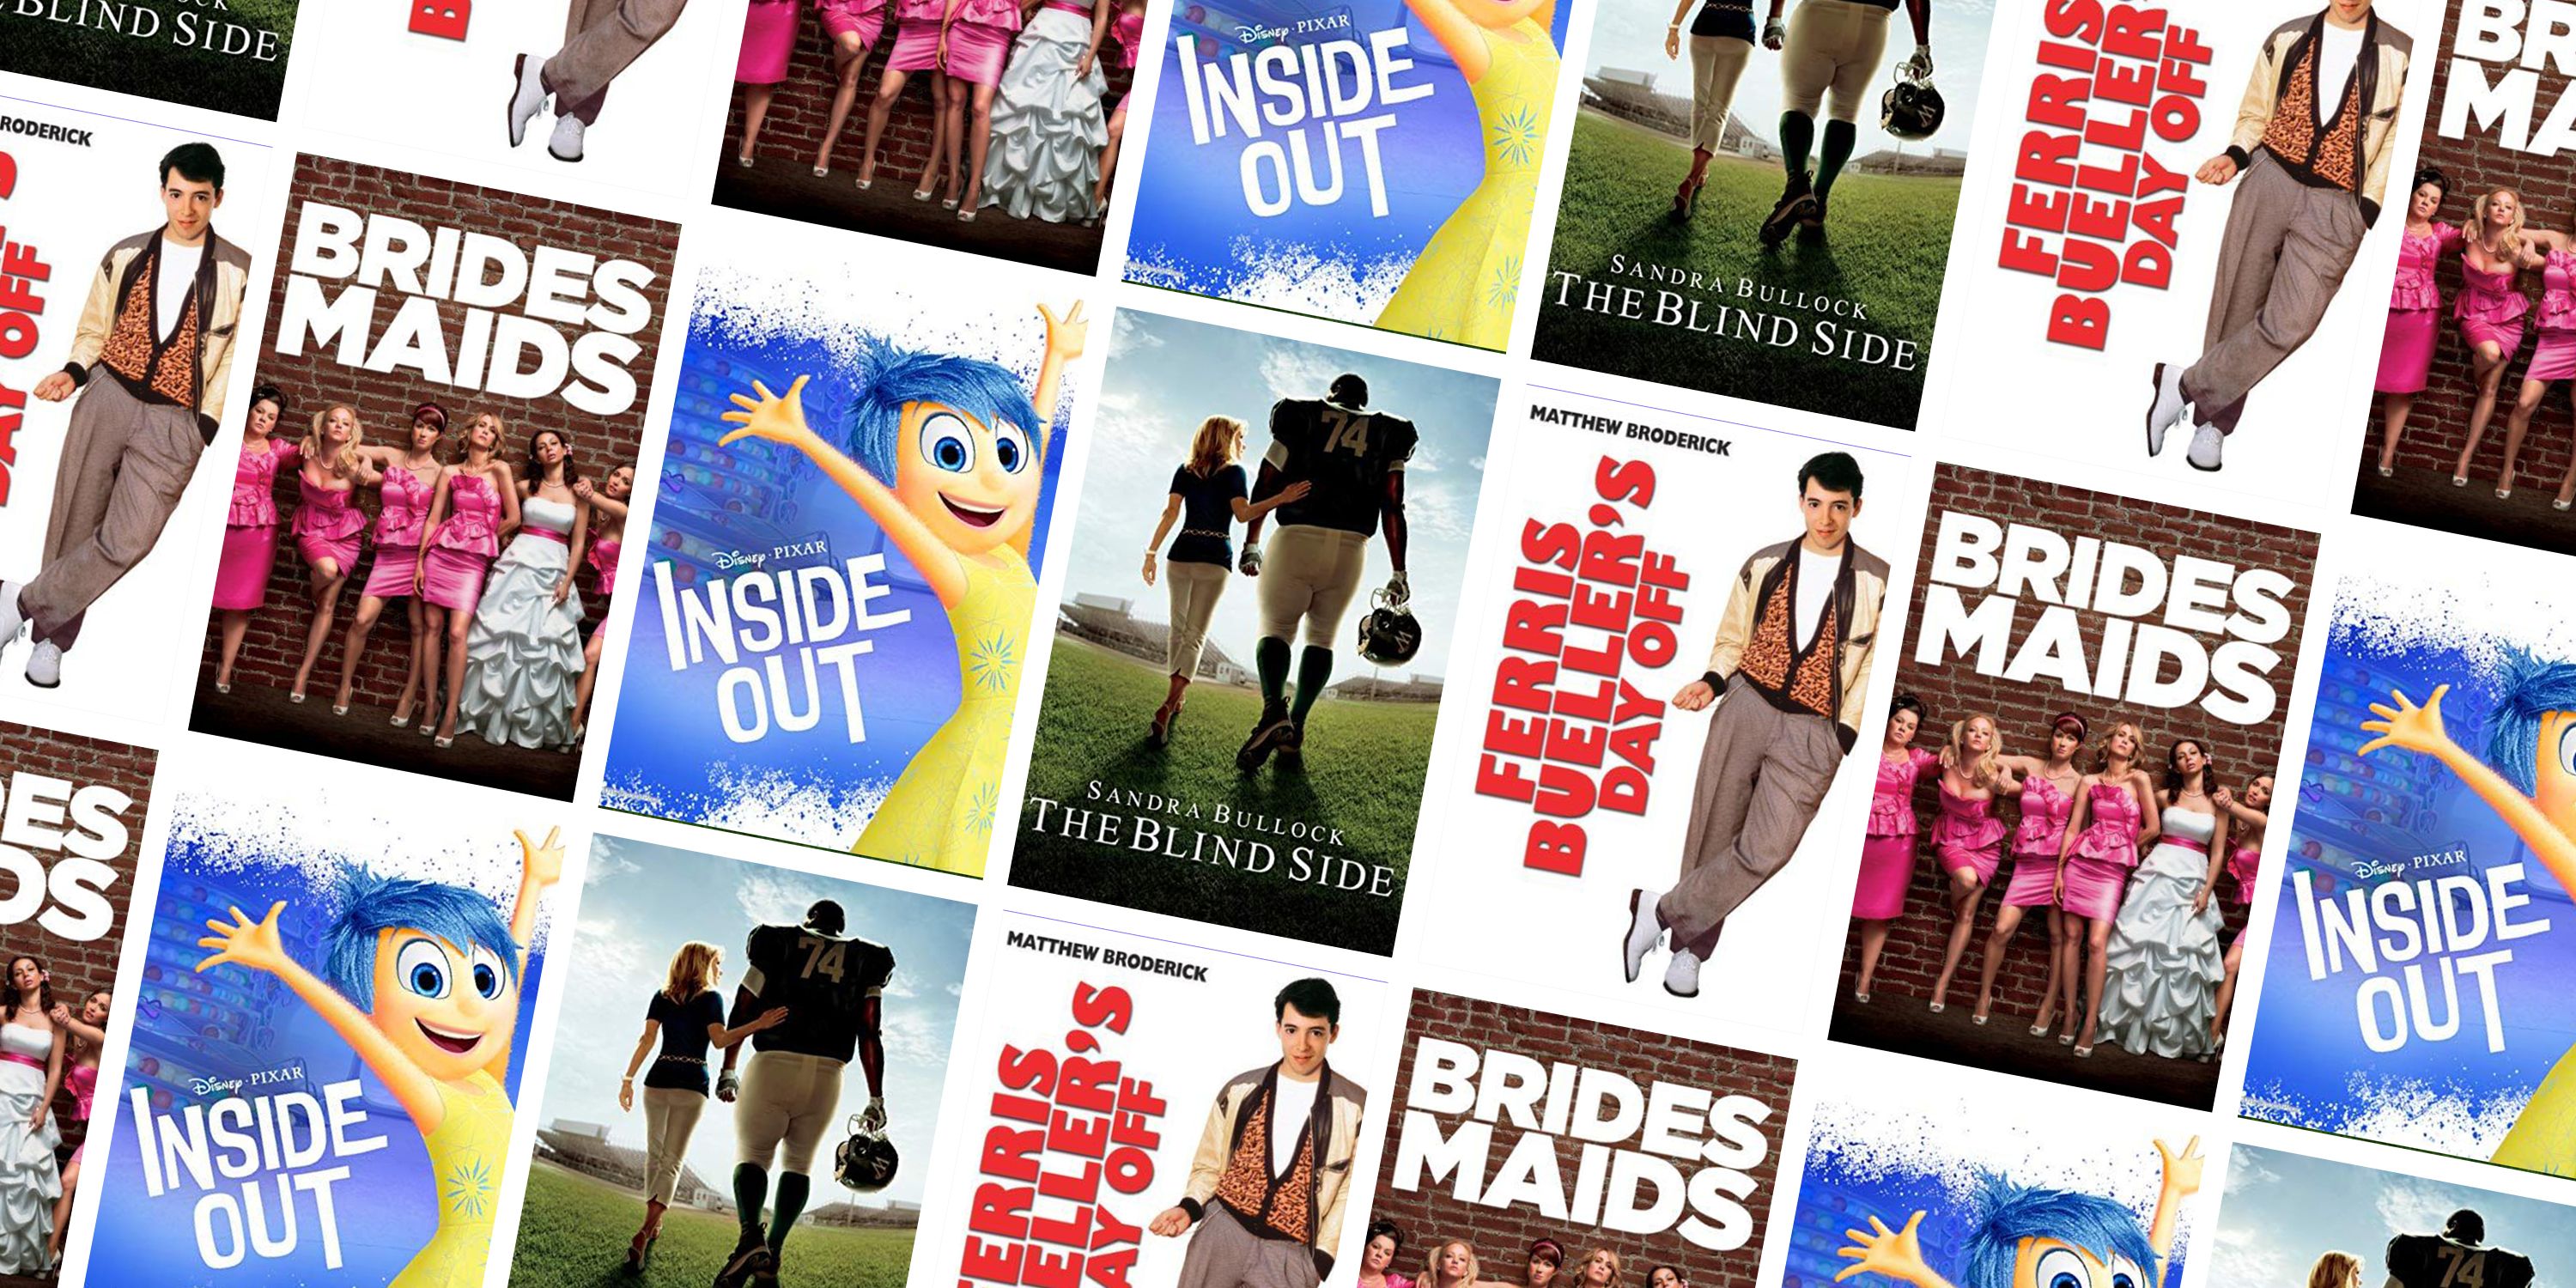 33 Best Feel Good Movies - Happy Movies to Make You Smile